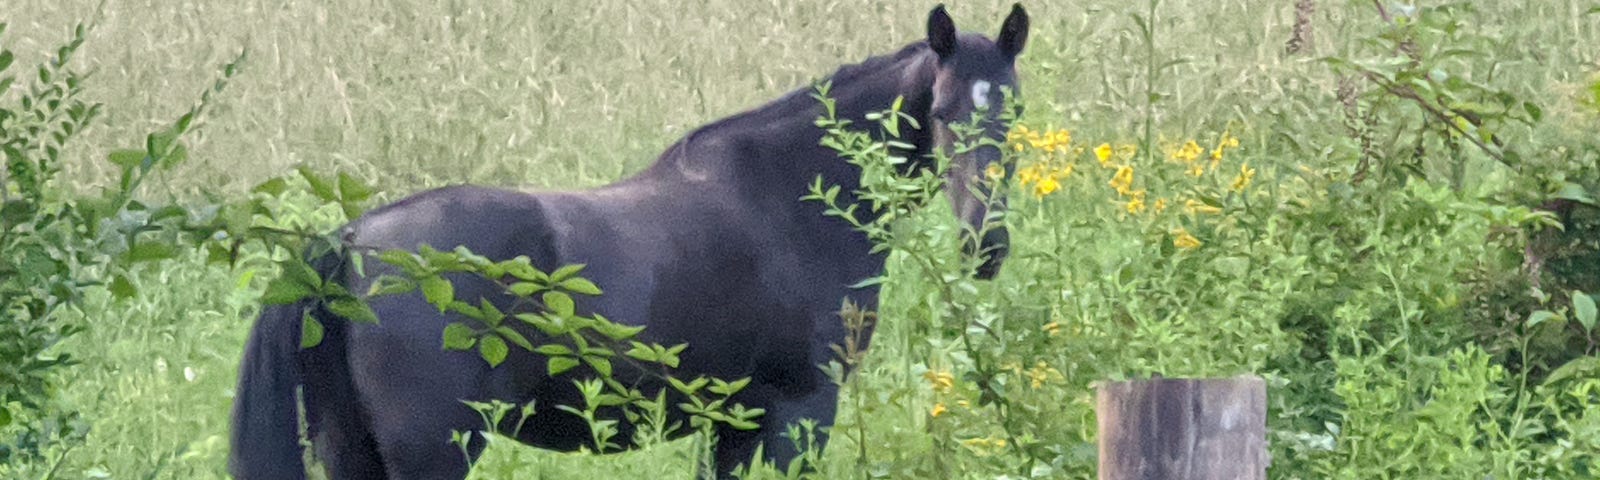 Black horse standing in a field of grass.